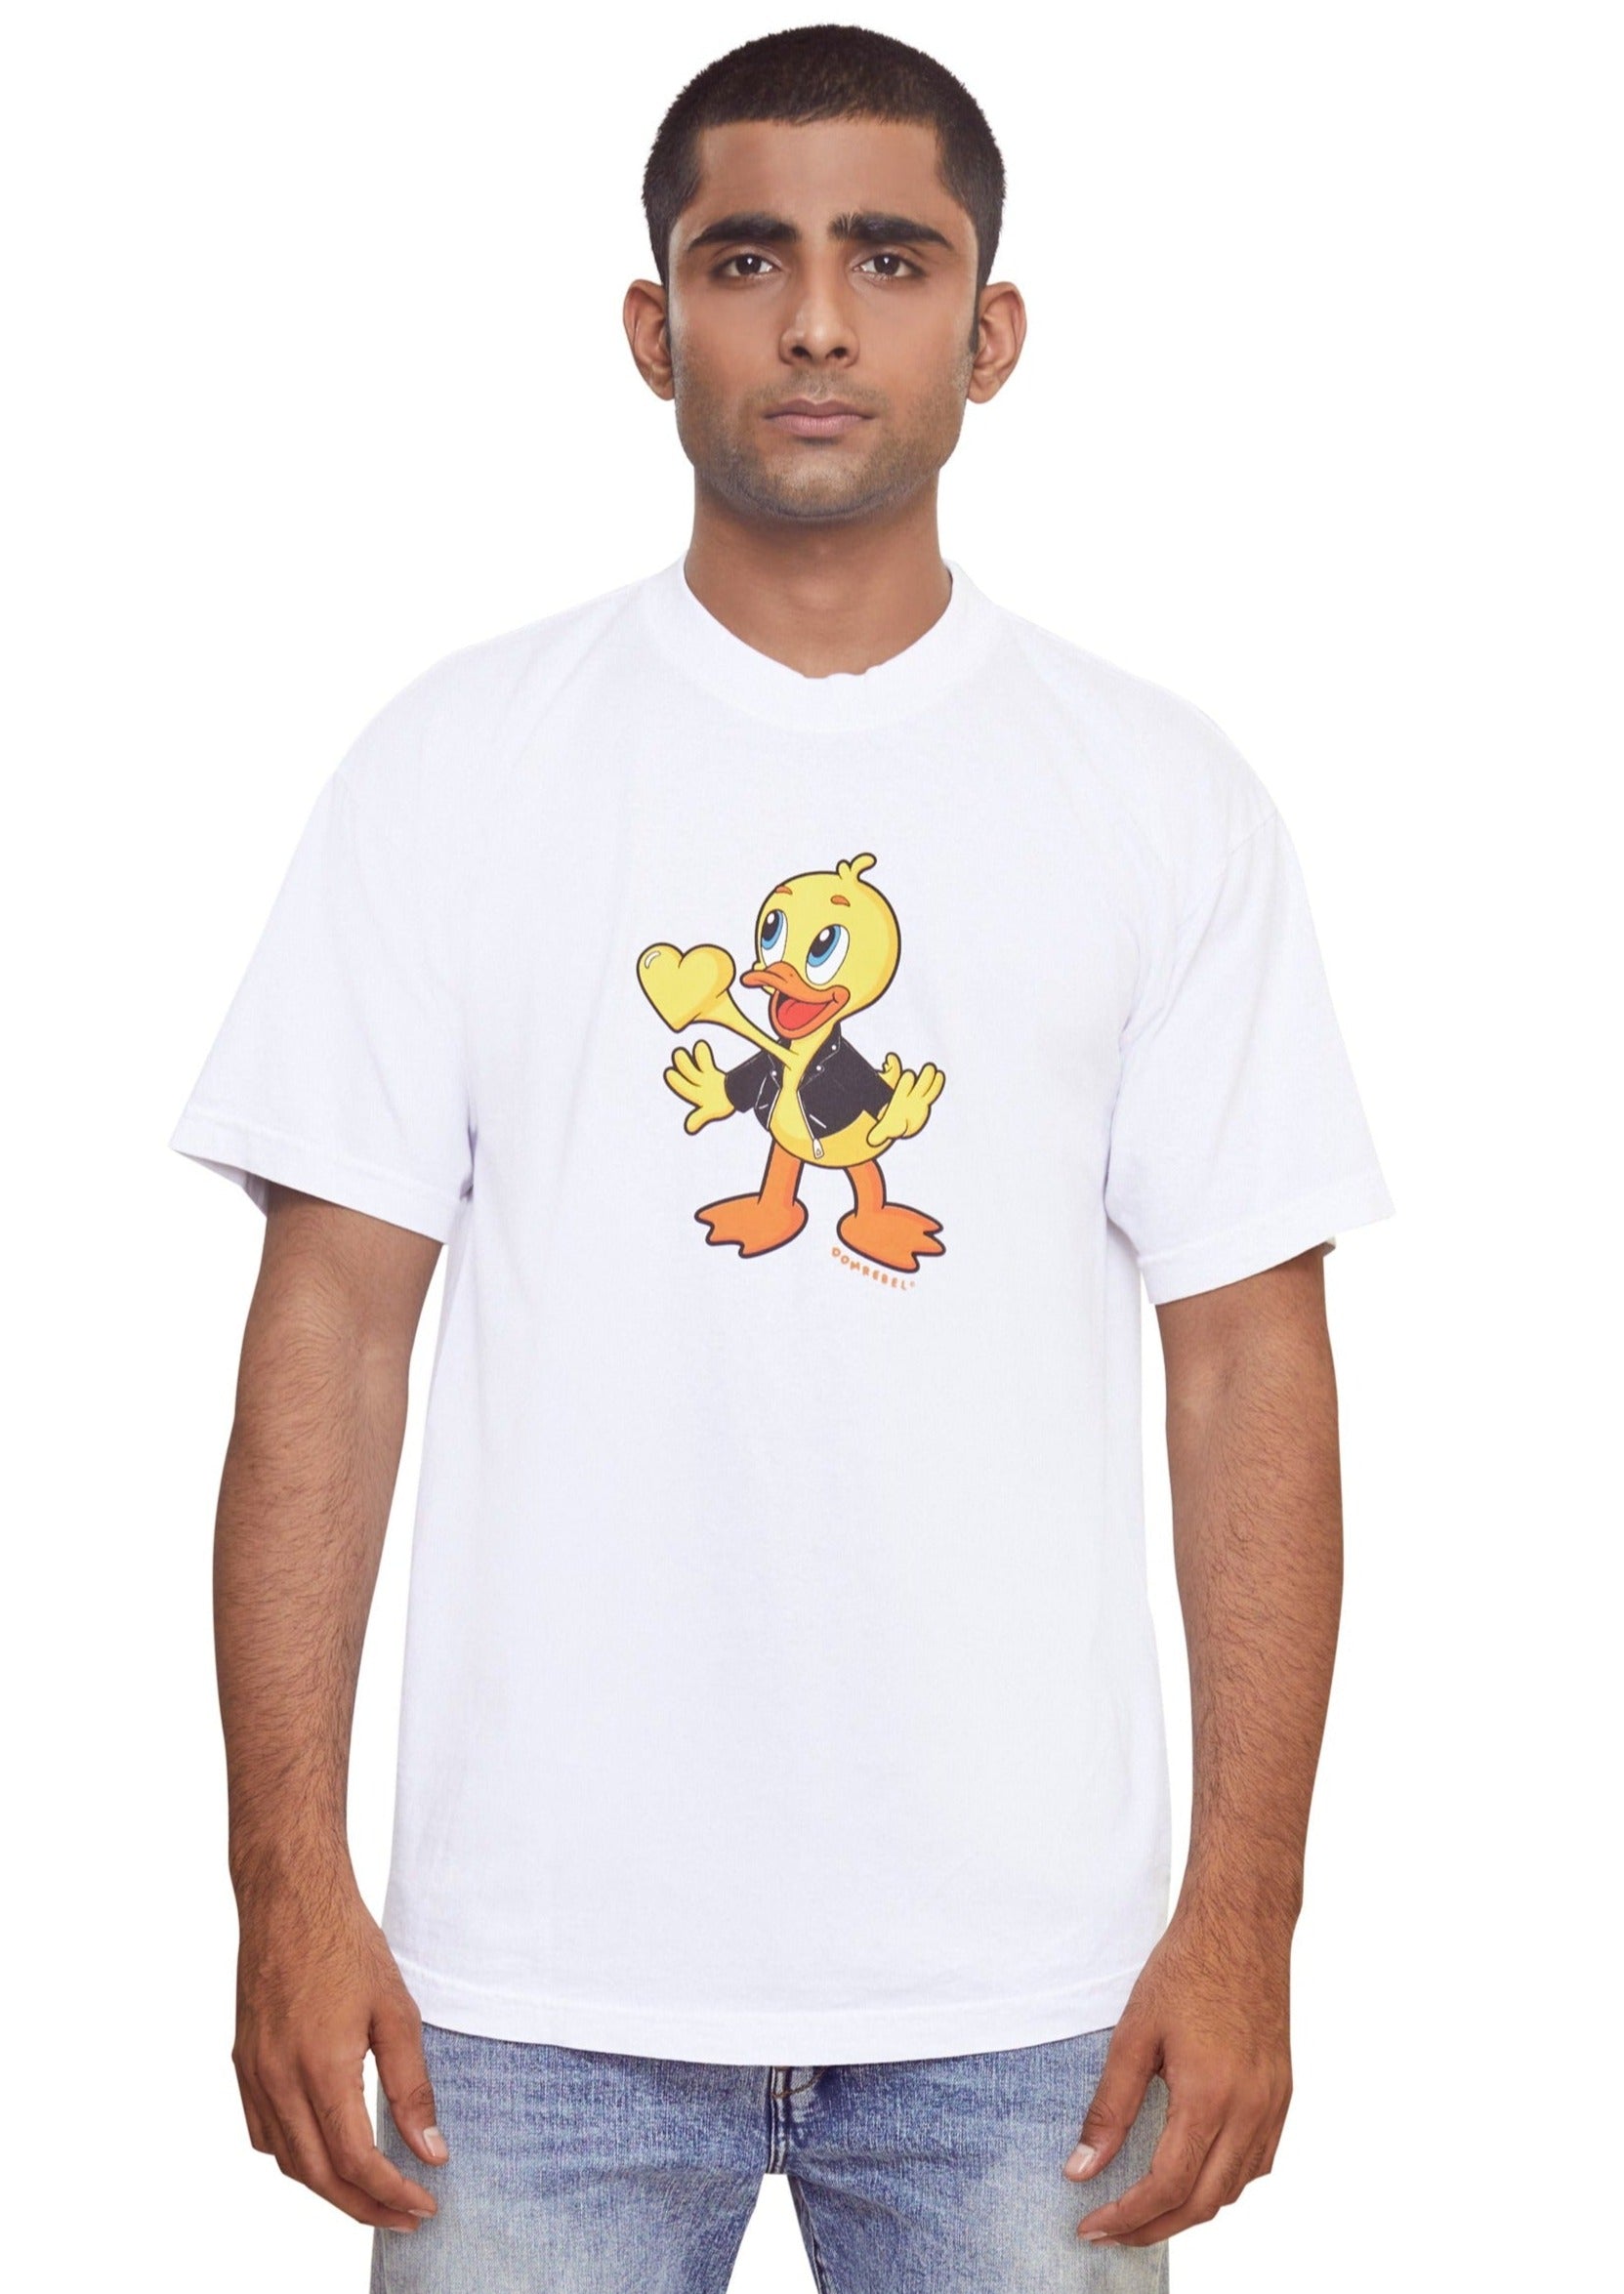 White Graphic t-shirt by Dom Rebel in a medium weight 100% cotton fabric with duck print from the brand Domrebel